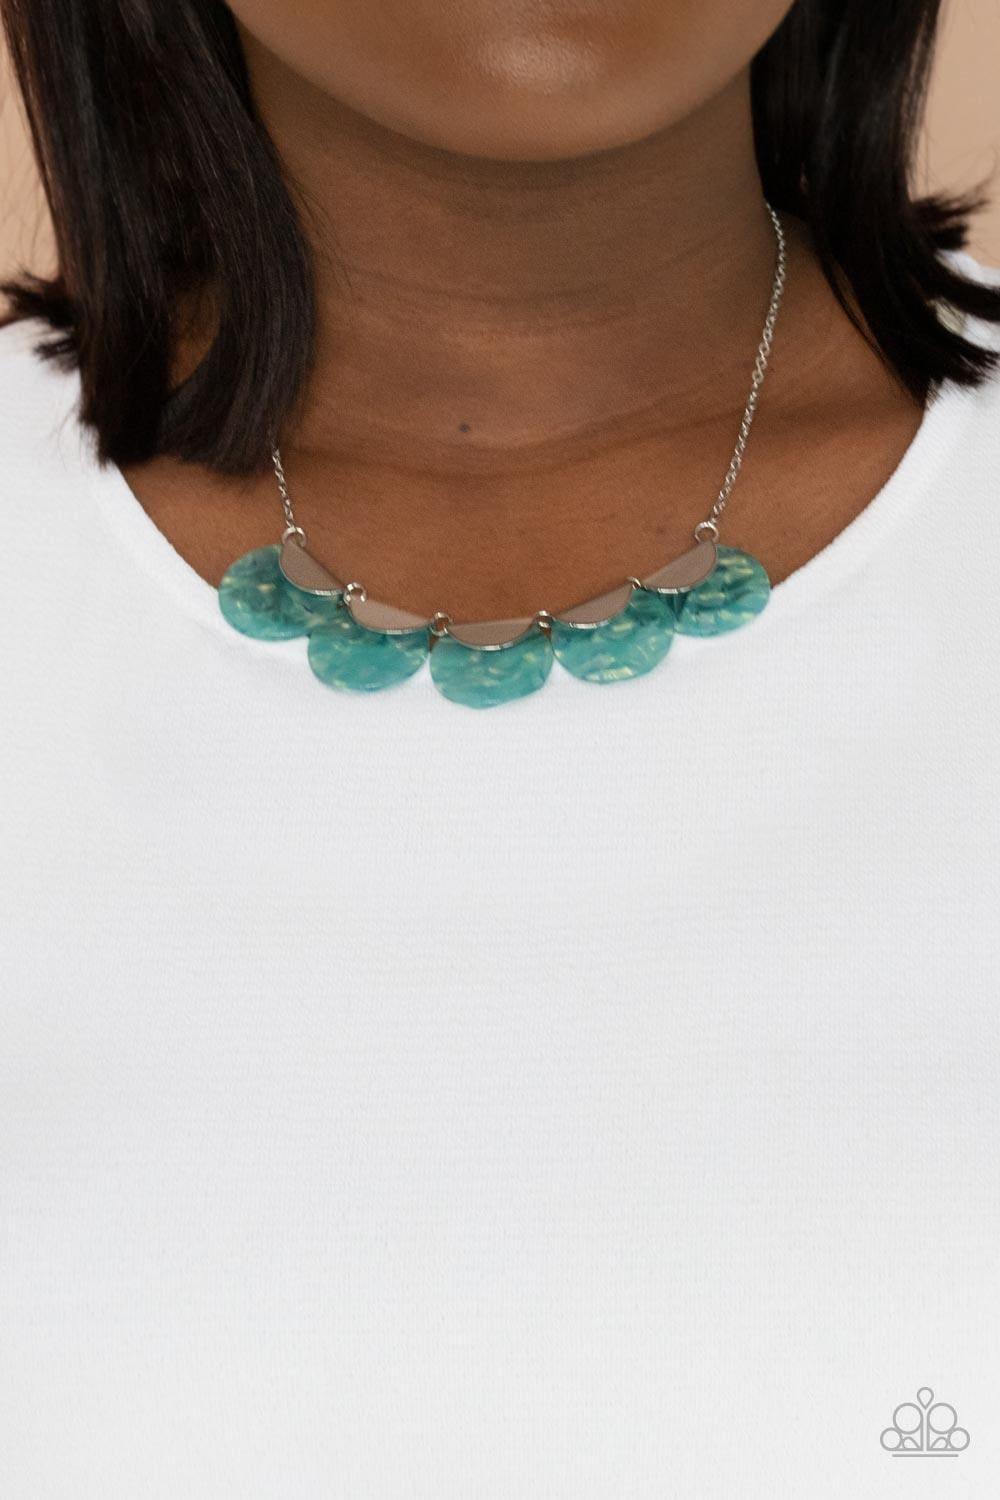 Paparazzi Accessories - Mermaid Oasis - Blue Necklace - Bling by JessieK